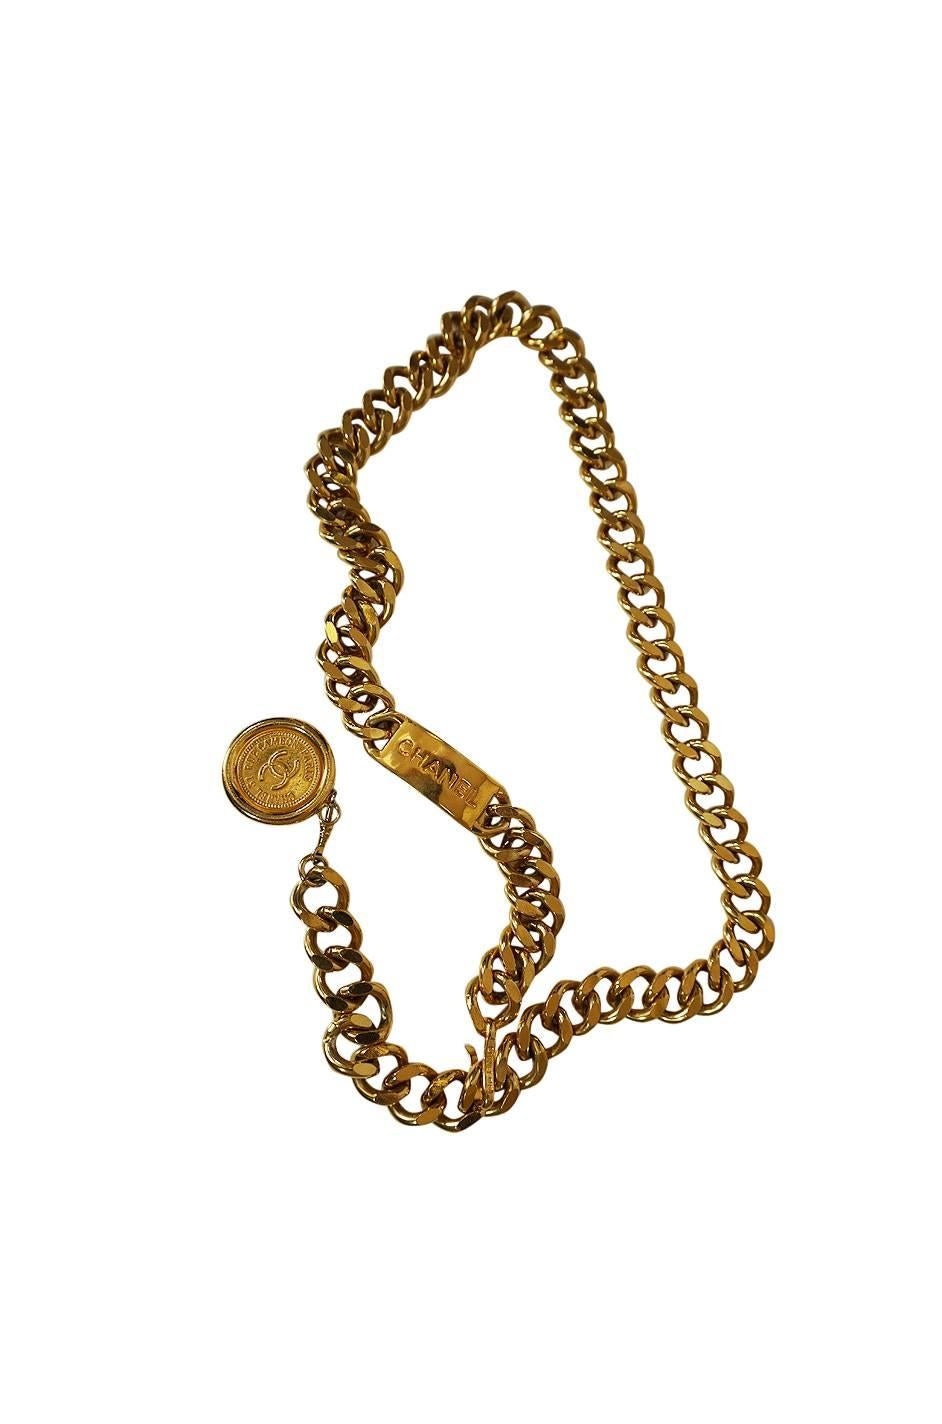 

Love this weighty gold chain belt from the 1990s. It's the perfect piece when you want to add a bold statement. It wraps and hooks around the waist and has a dominant ID plate with Chanel engraved into it. At the end of the chain that hangs it